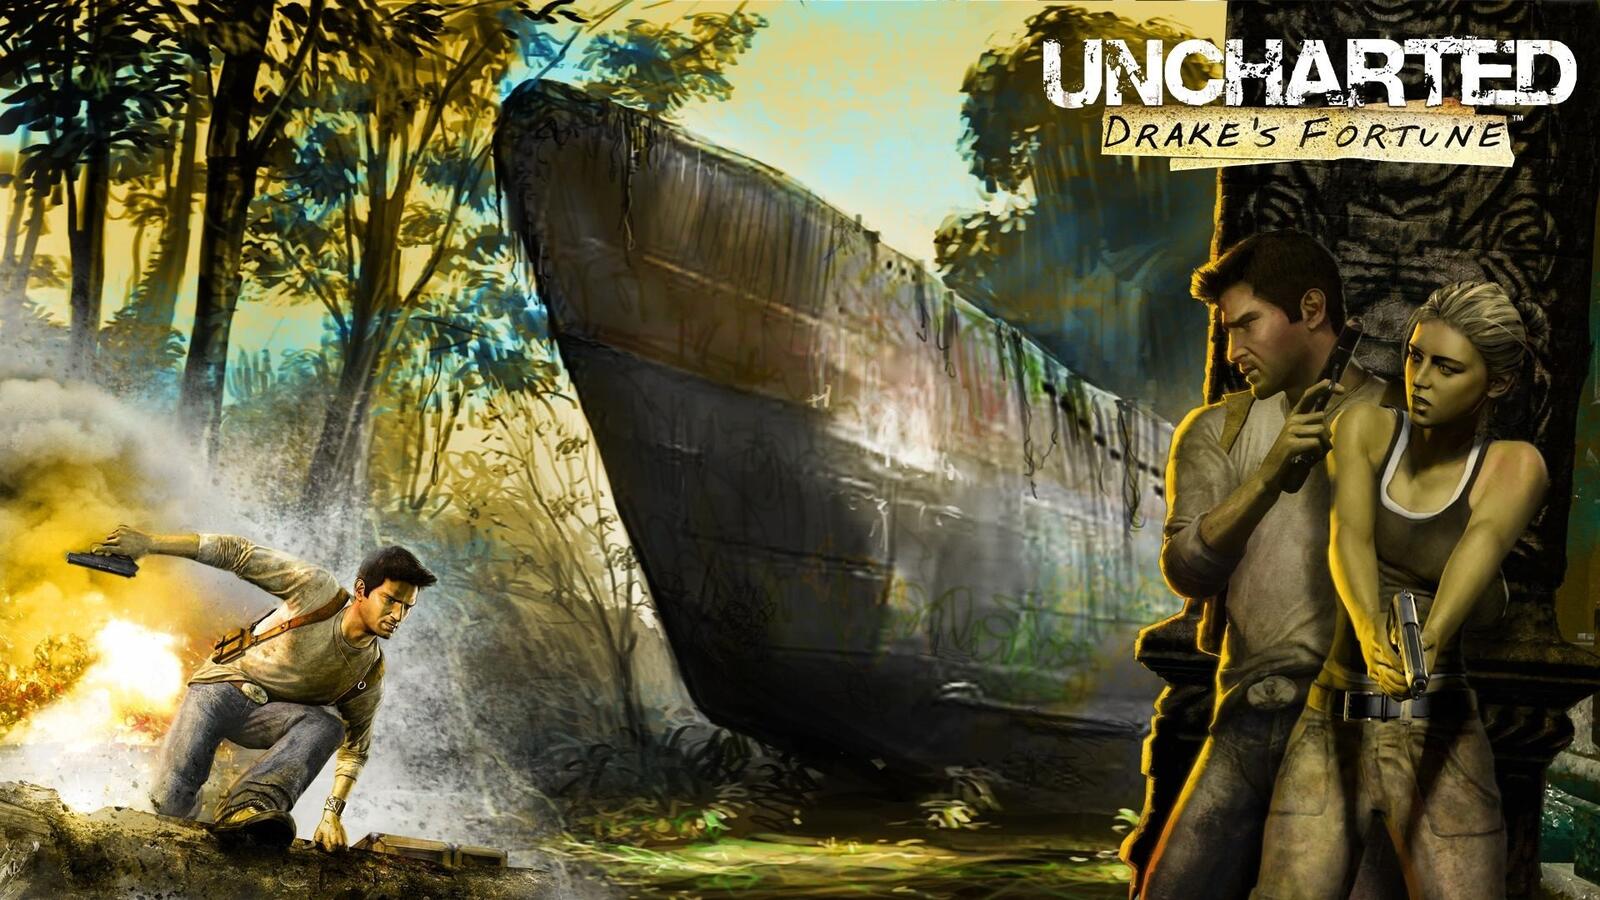 Free photo A cool picture from the game uncharted drakes fortune.